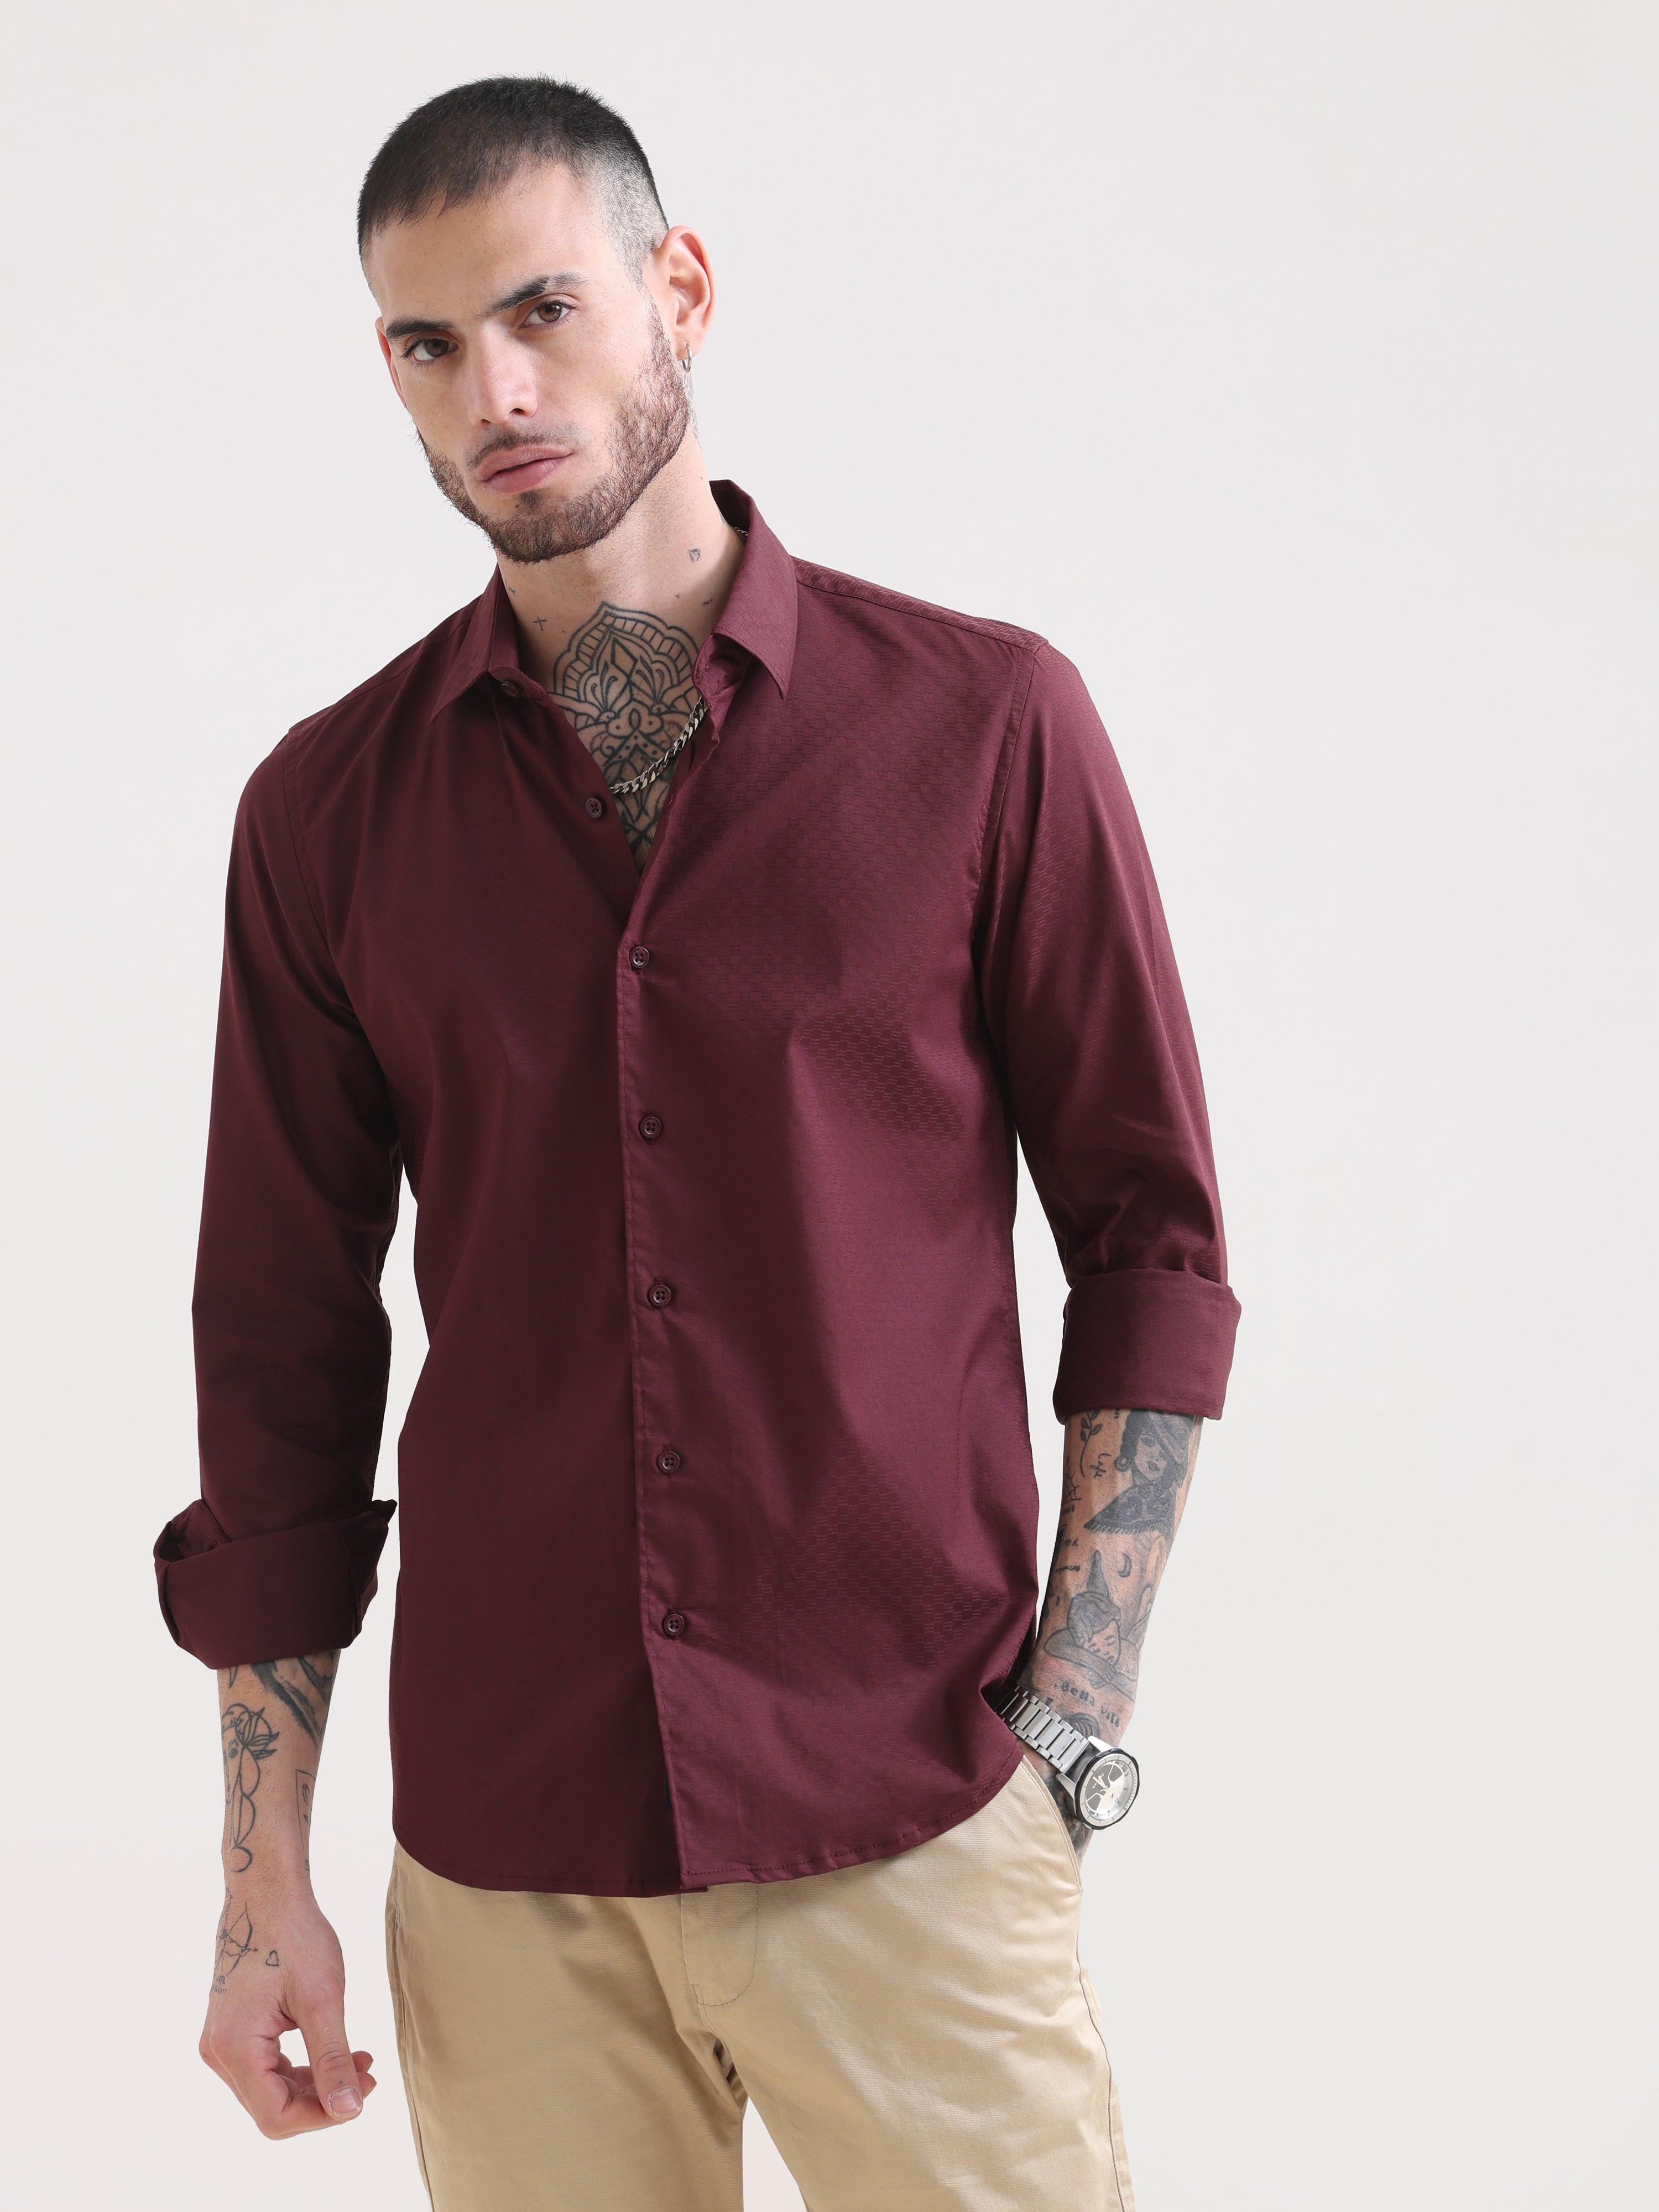 Currant Wine Textured Solid ShirtRs. 1399.00